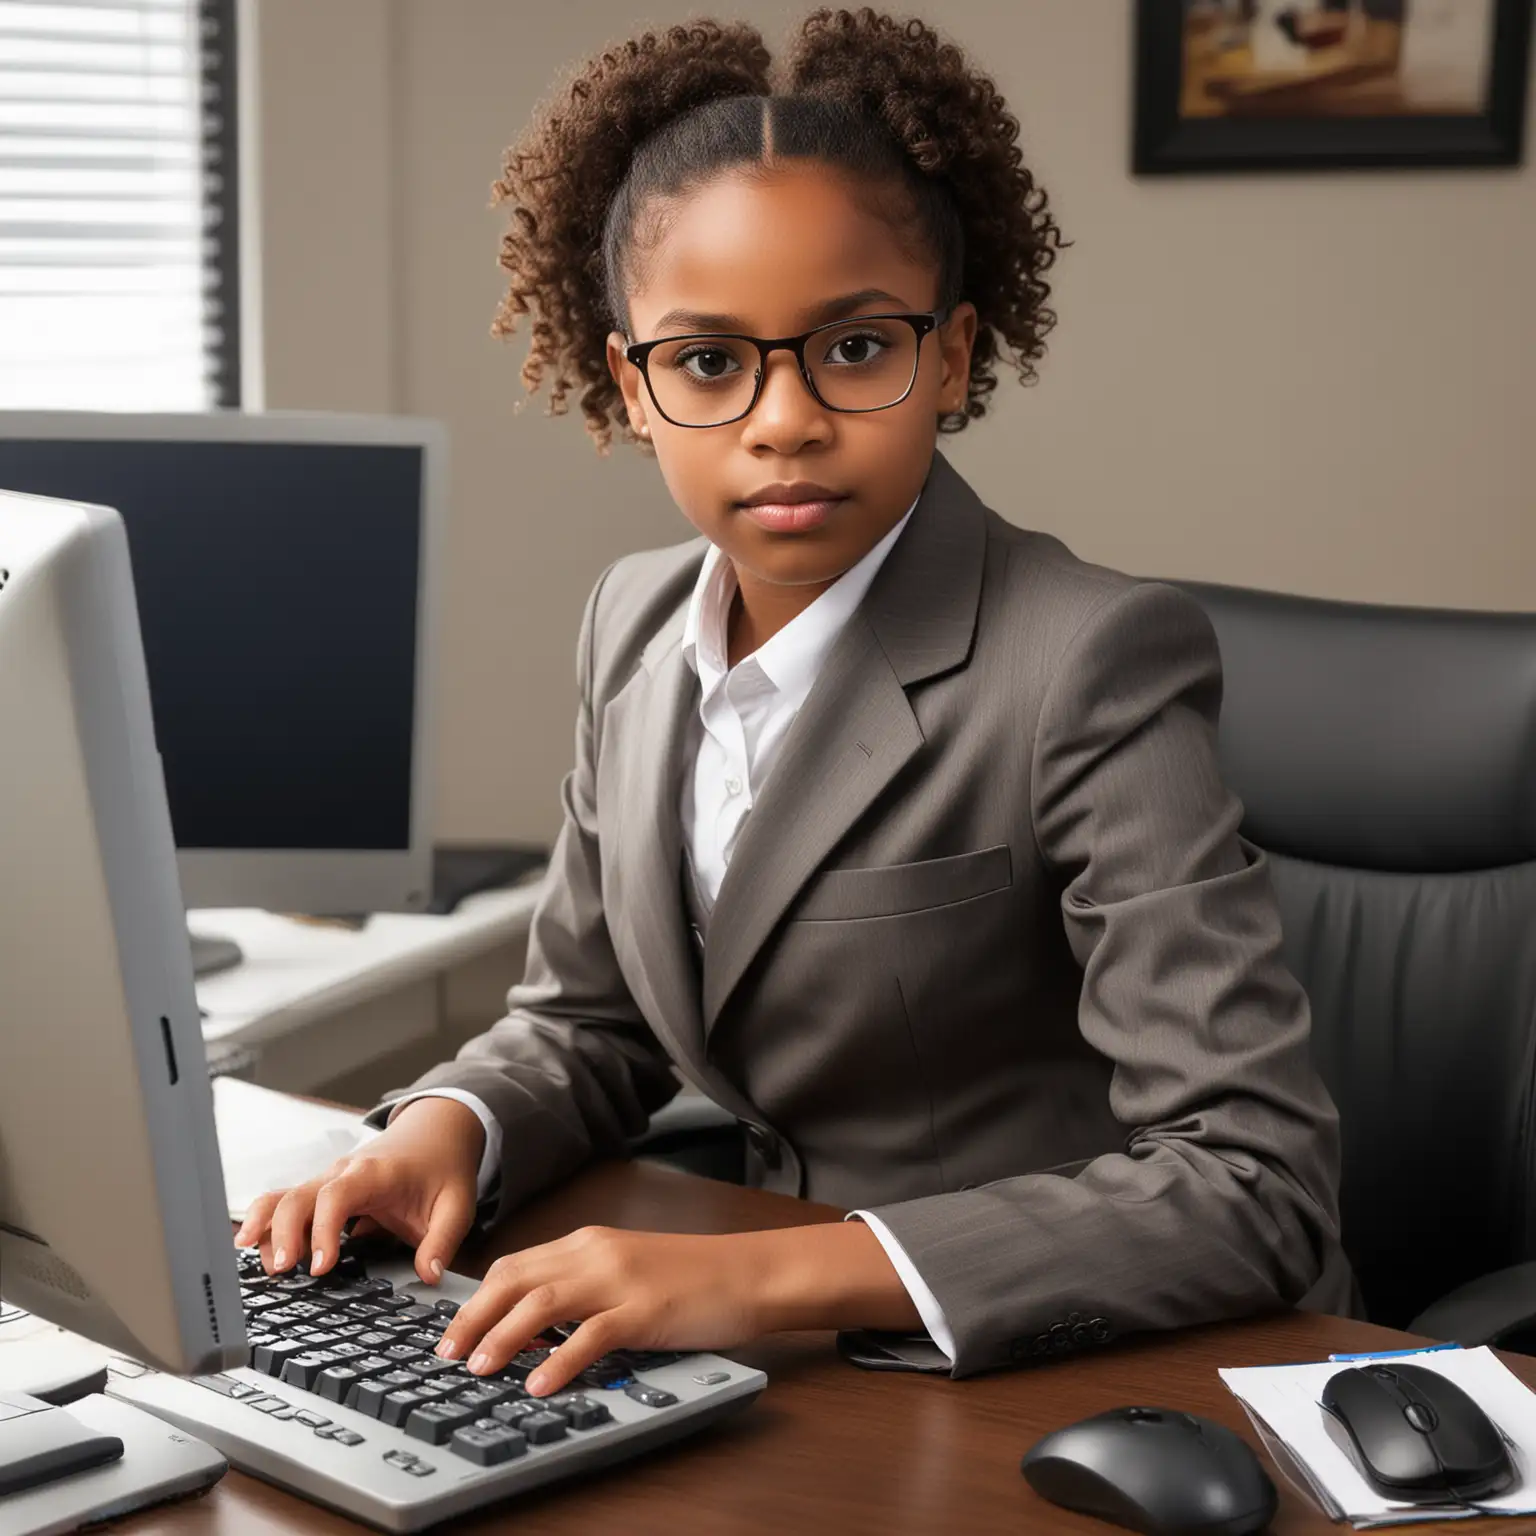 a young african american girl that appears to be 10 years old. She is dressed in a professional suite and sitting and  computer desk typing on a computer. She is the boss.